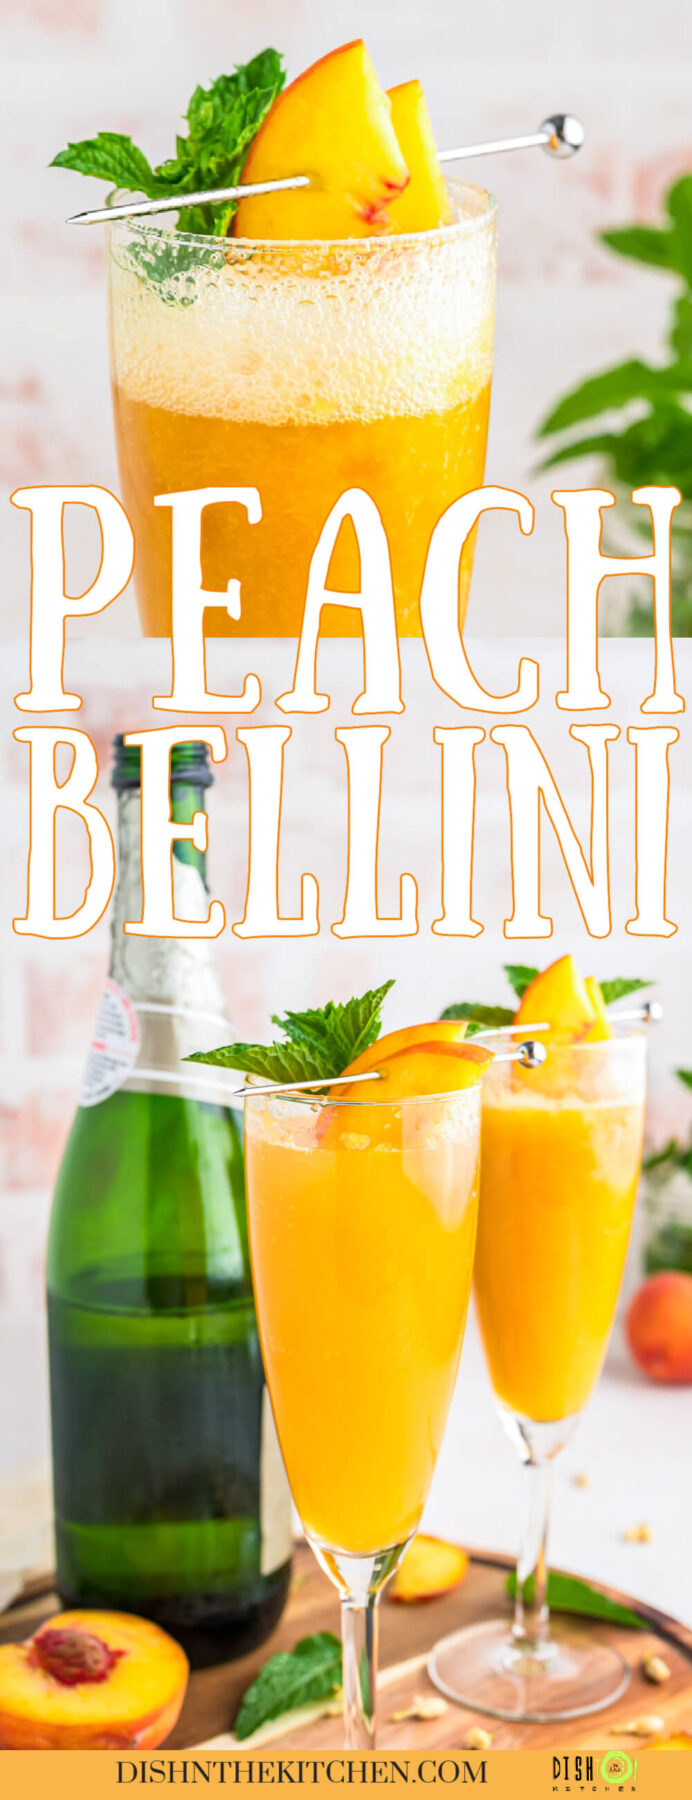 A pinterest image featuring champagne flutes filled with Peach Bellini cocktail and garnished with slices of peach and sprigs of fresh mint.